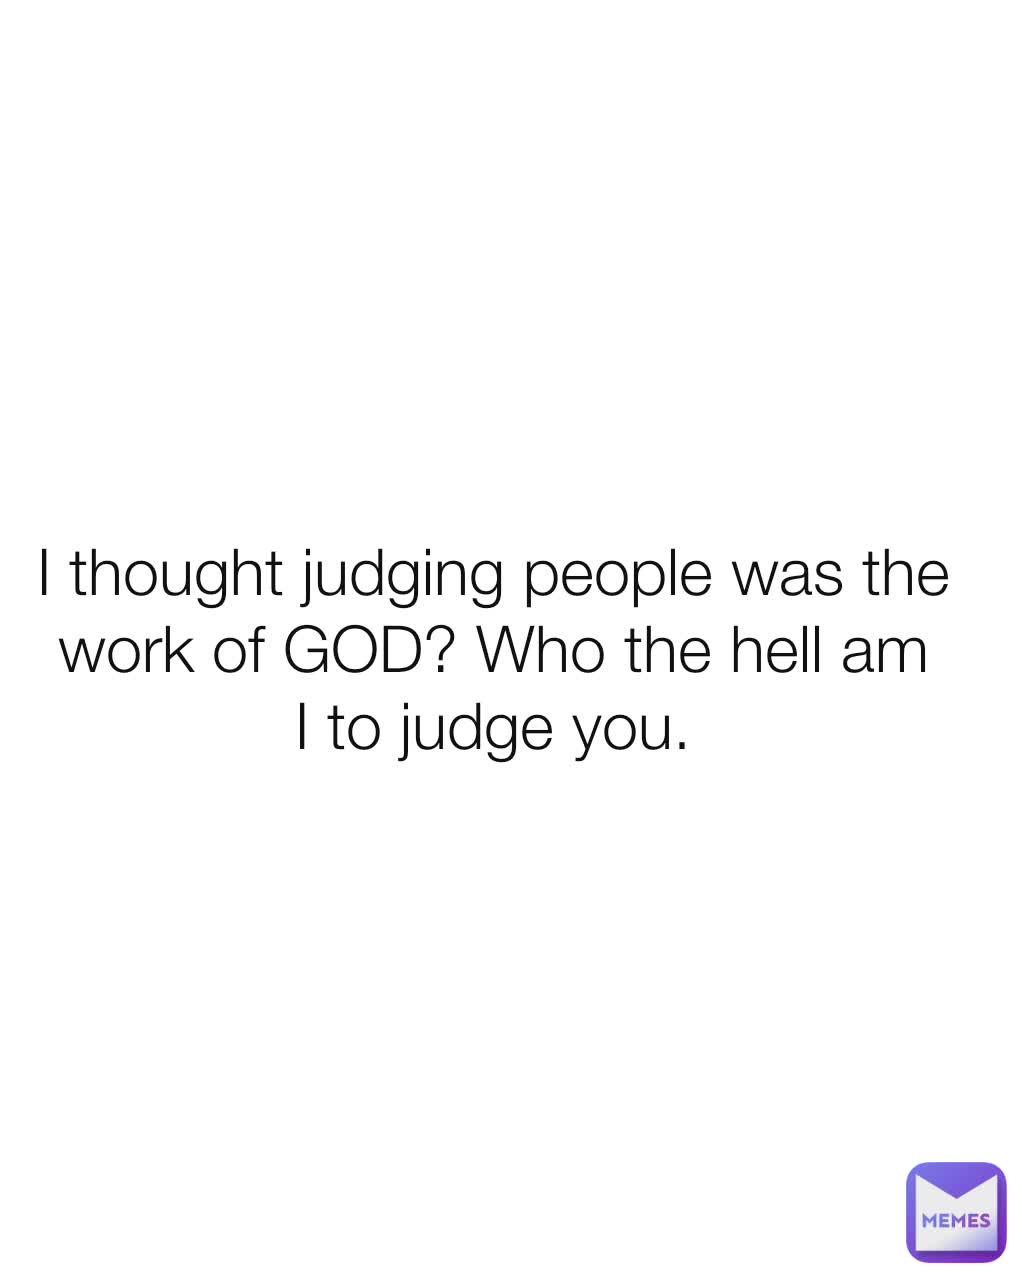 I thought judging people was the work of GOD? Who the hell am I to judge you.